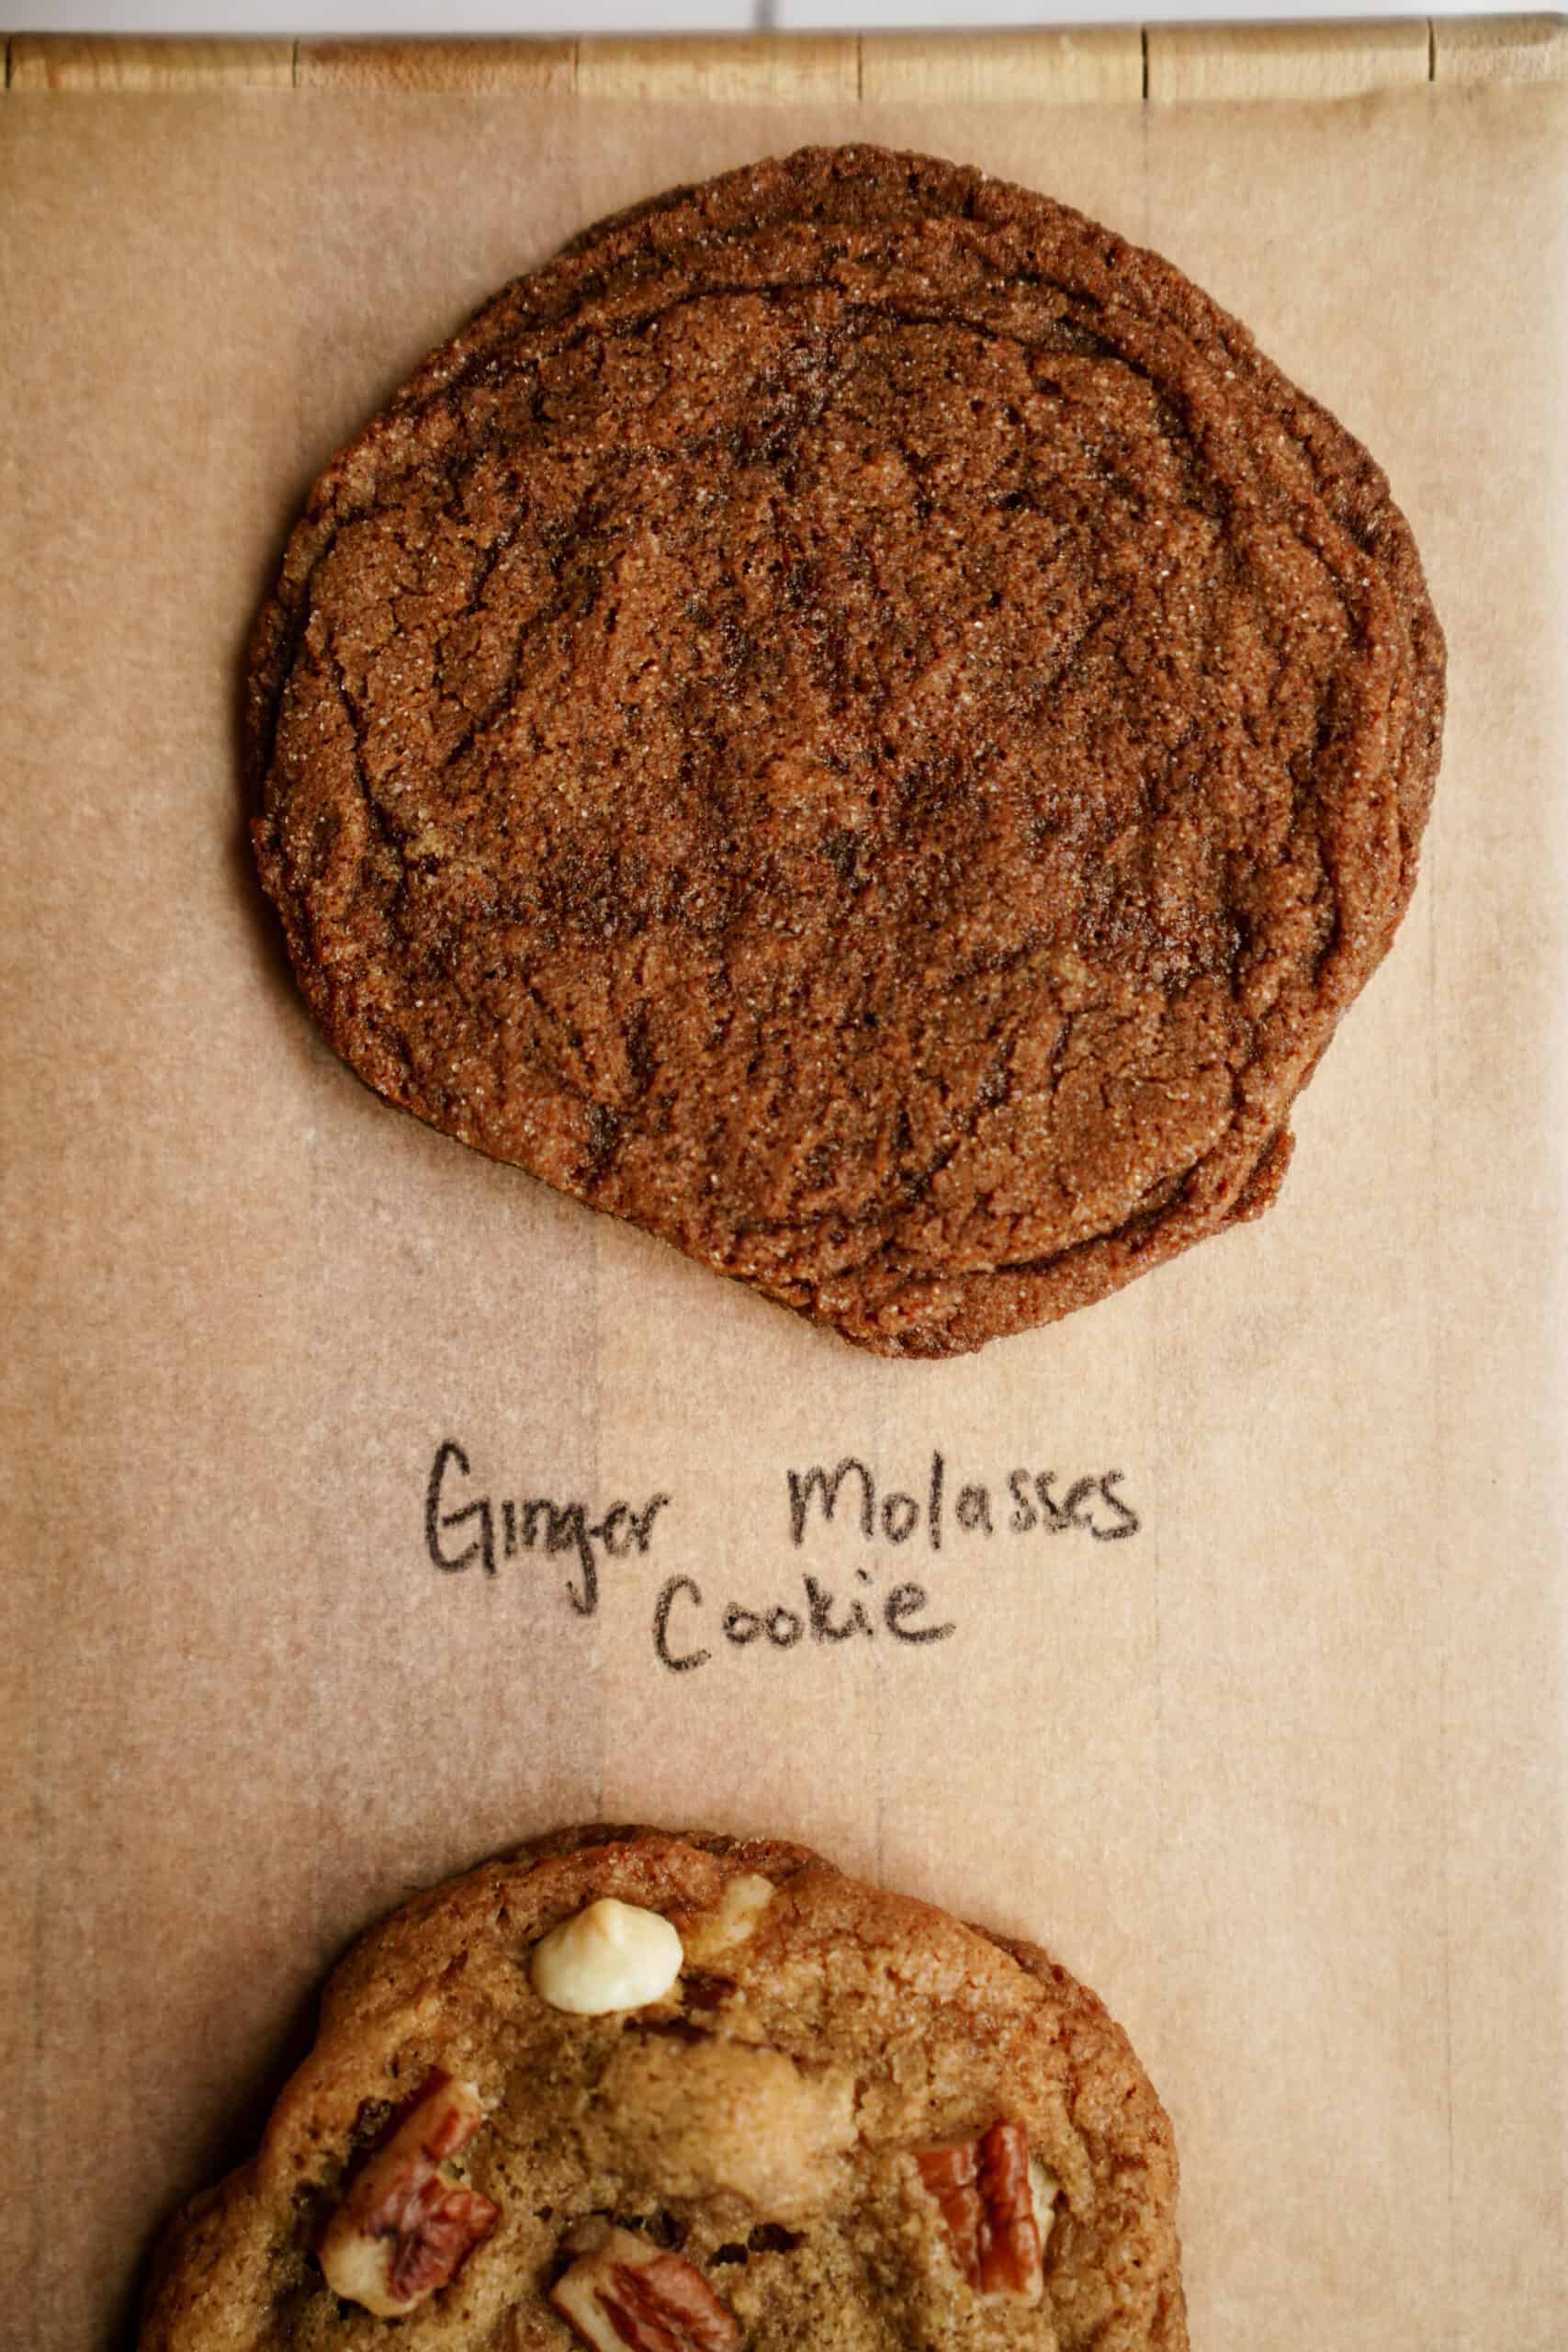 Ginger molasses cookie made with cookie dough recipe